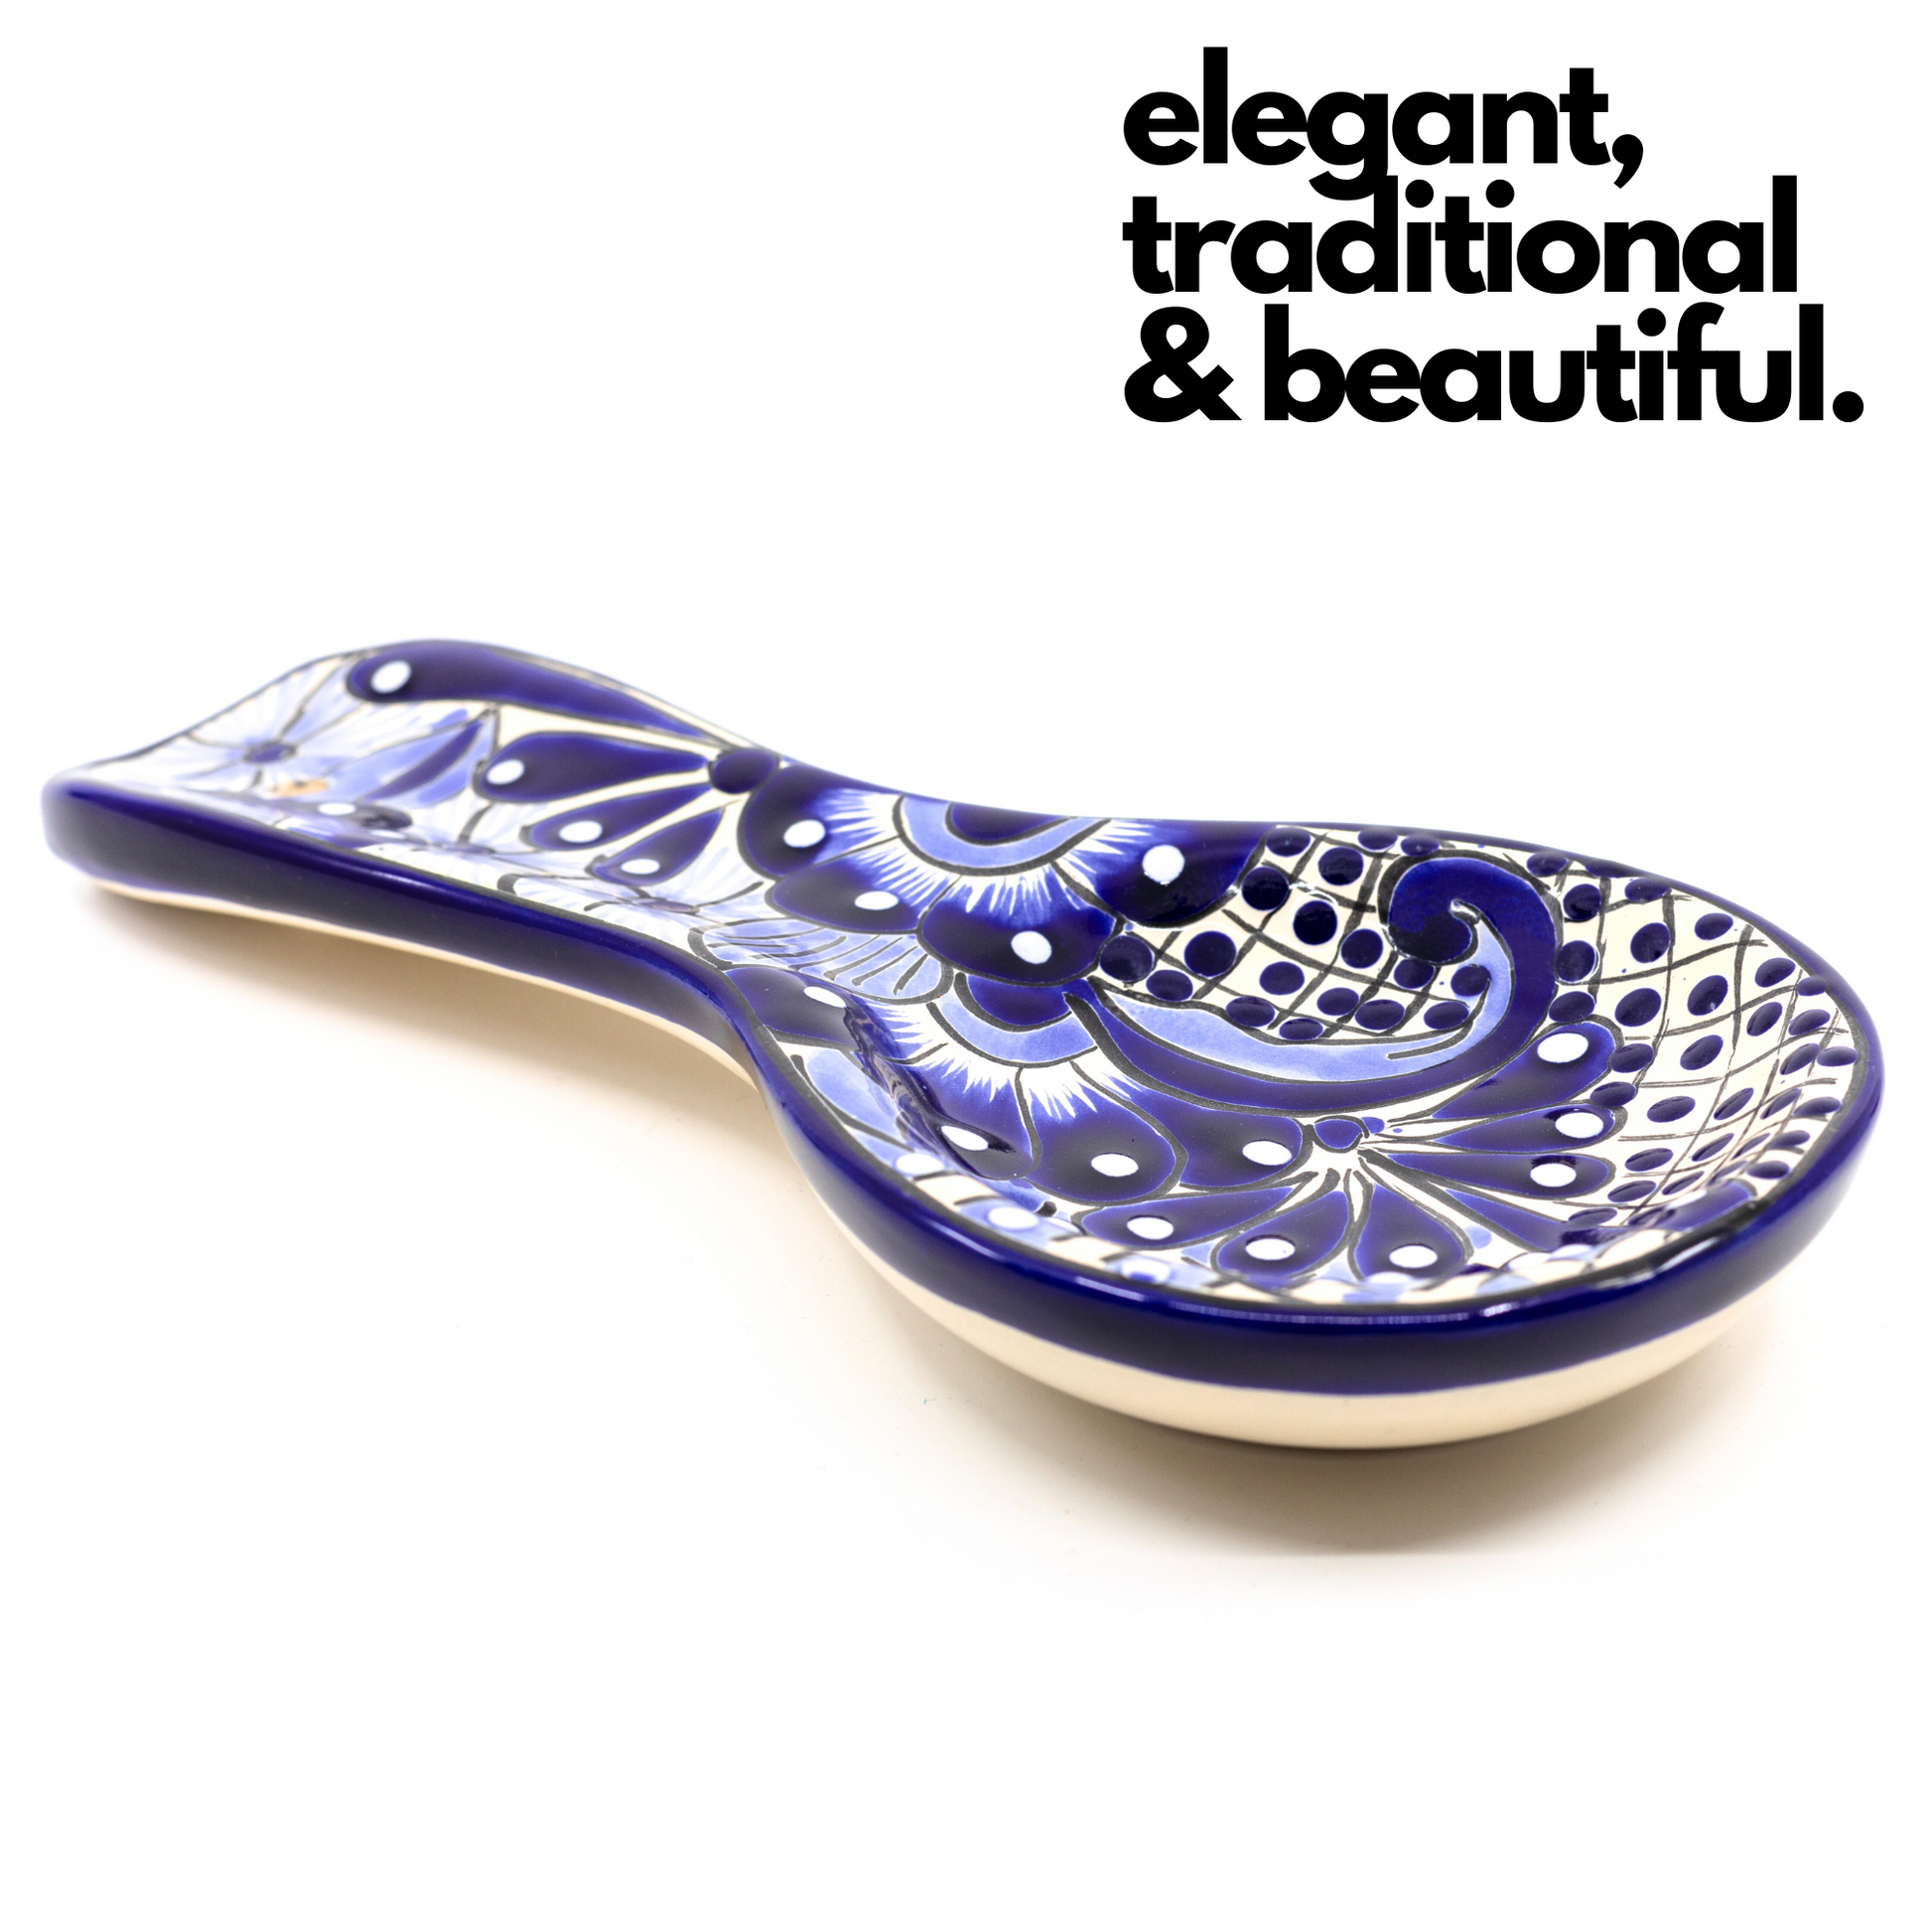 Cornucopia Whale Spoon Rest; Blue and White Ceramic Novelty Spoon Holder  for Kitchen Stove 